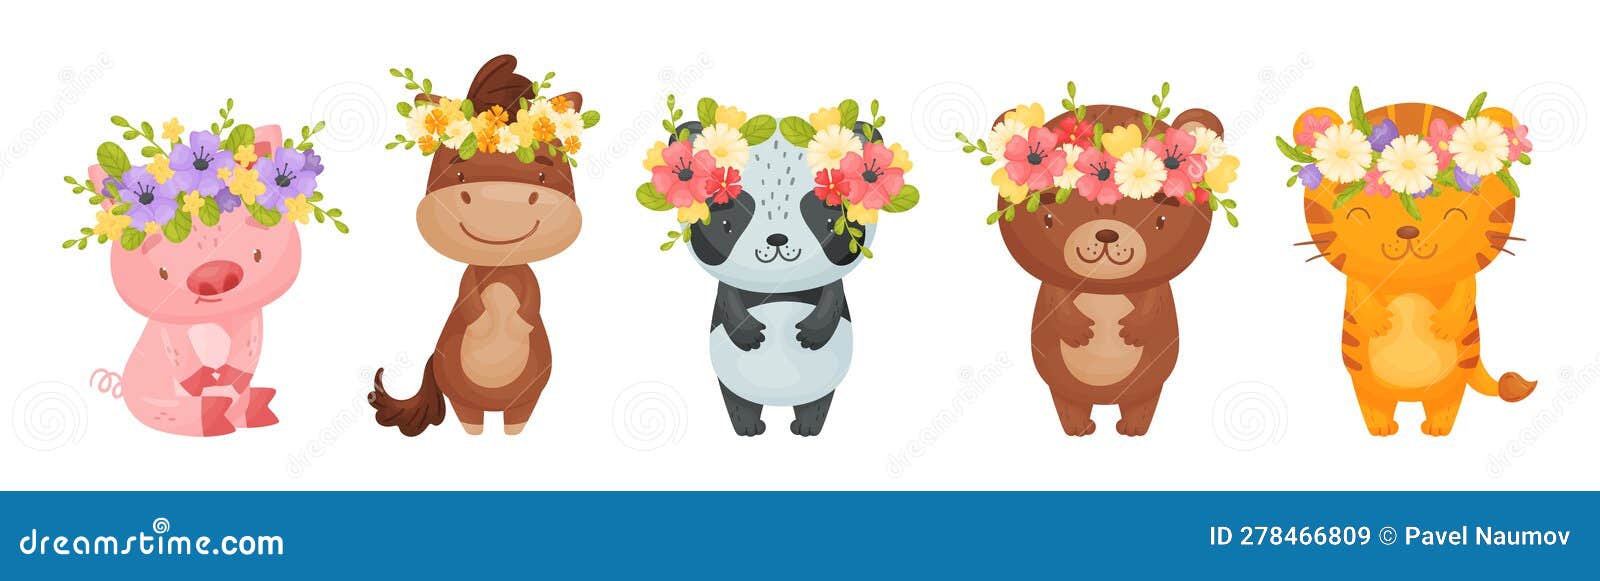 Cute Animals with Flower Wreath and Adornment on Their Head Vector Set ...